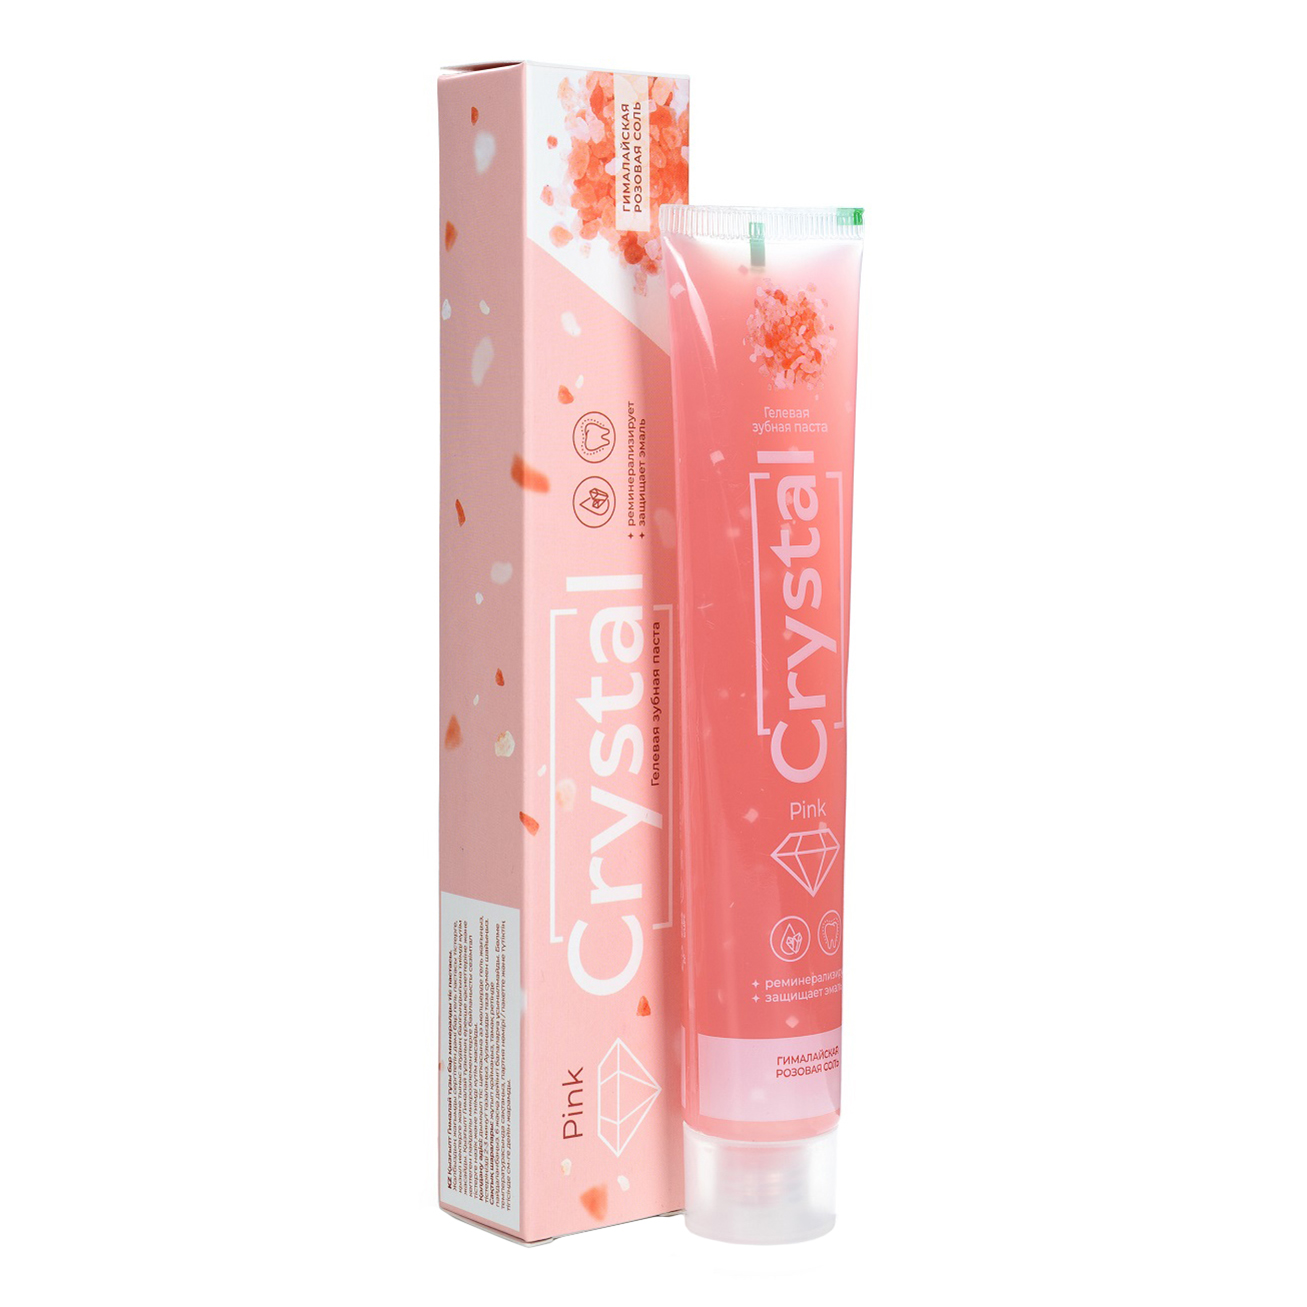 Зубная паста Dorall Collection Toothpaste Pink Crystal Реминерализующая, 100 мл зубная паста dorall collection toothpaste pink crystal реминерализующая 100 мл